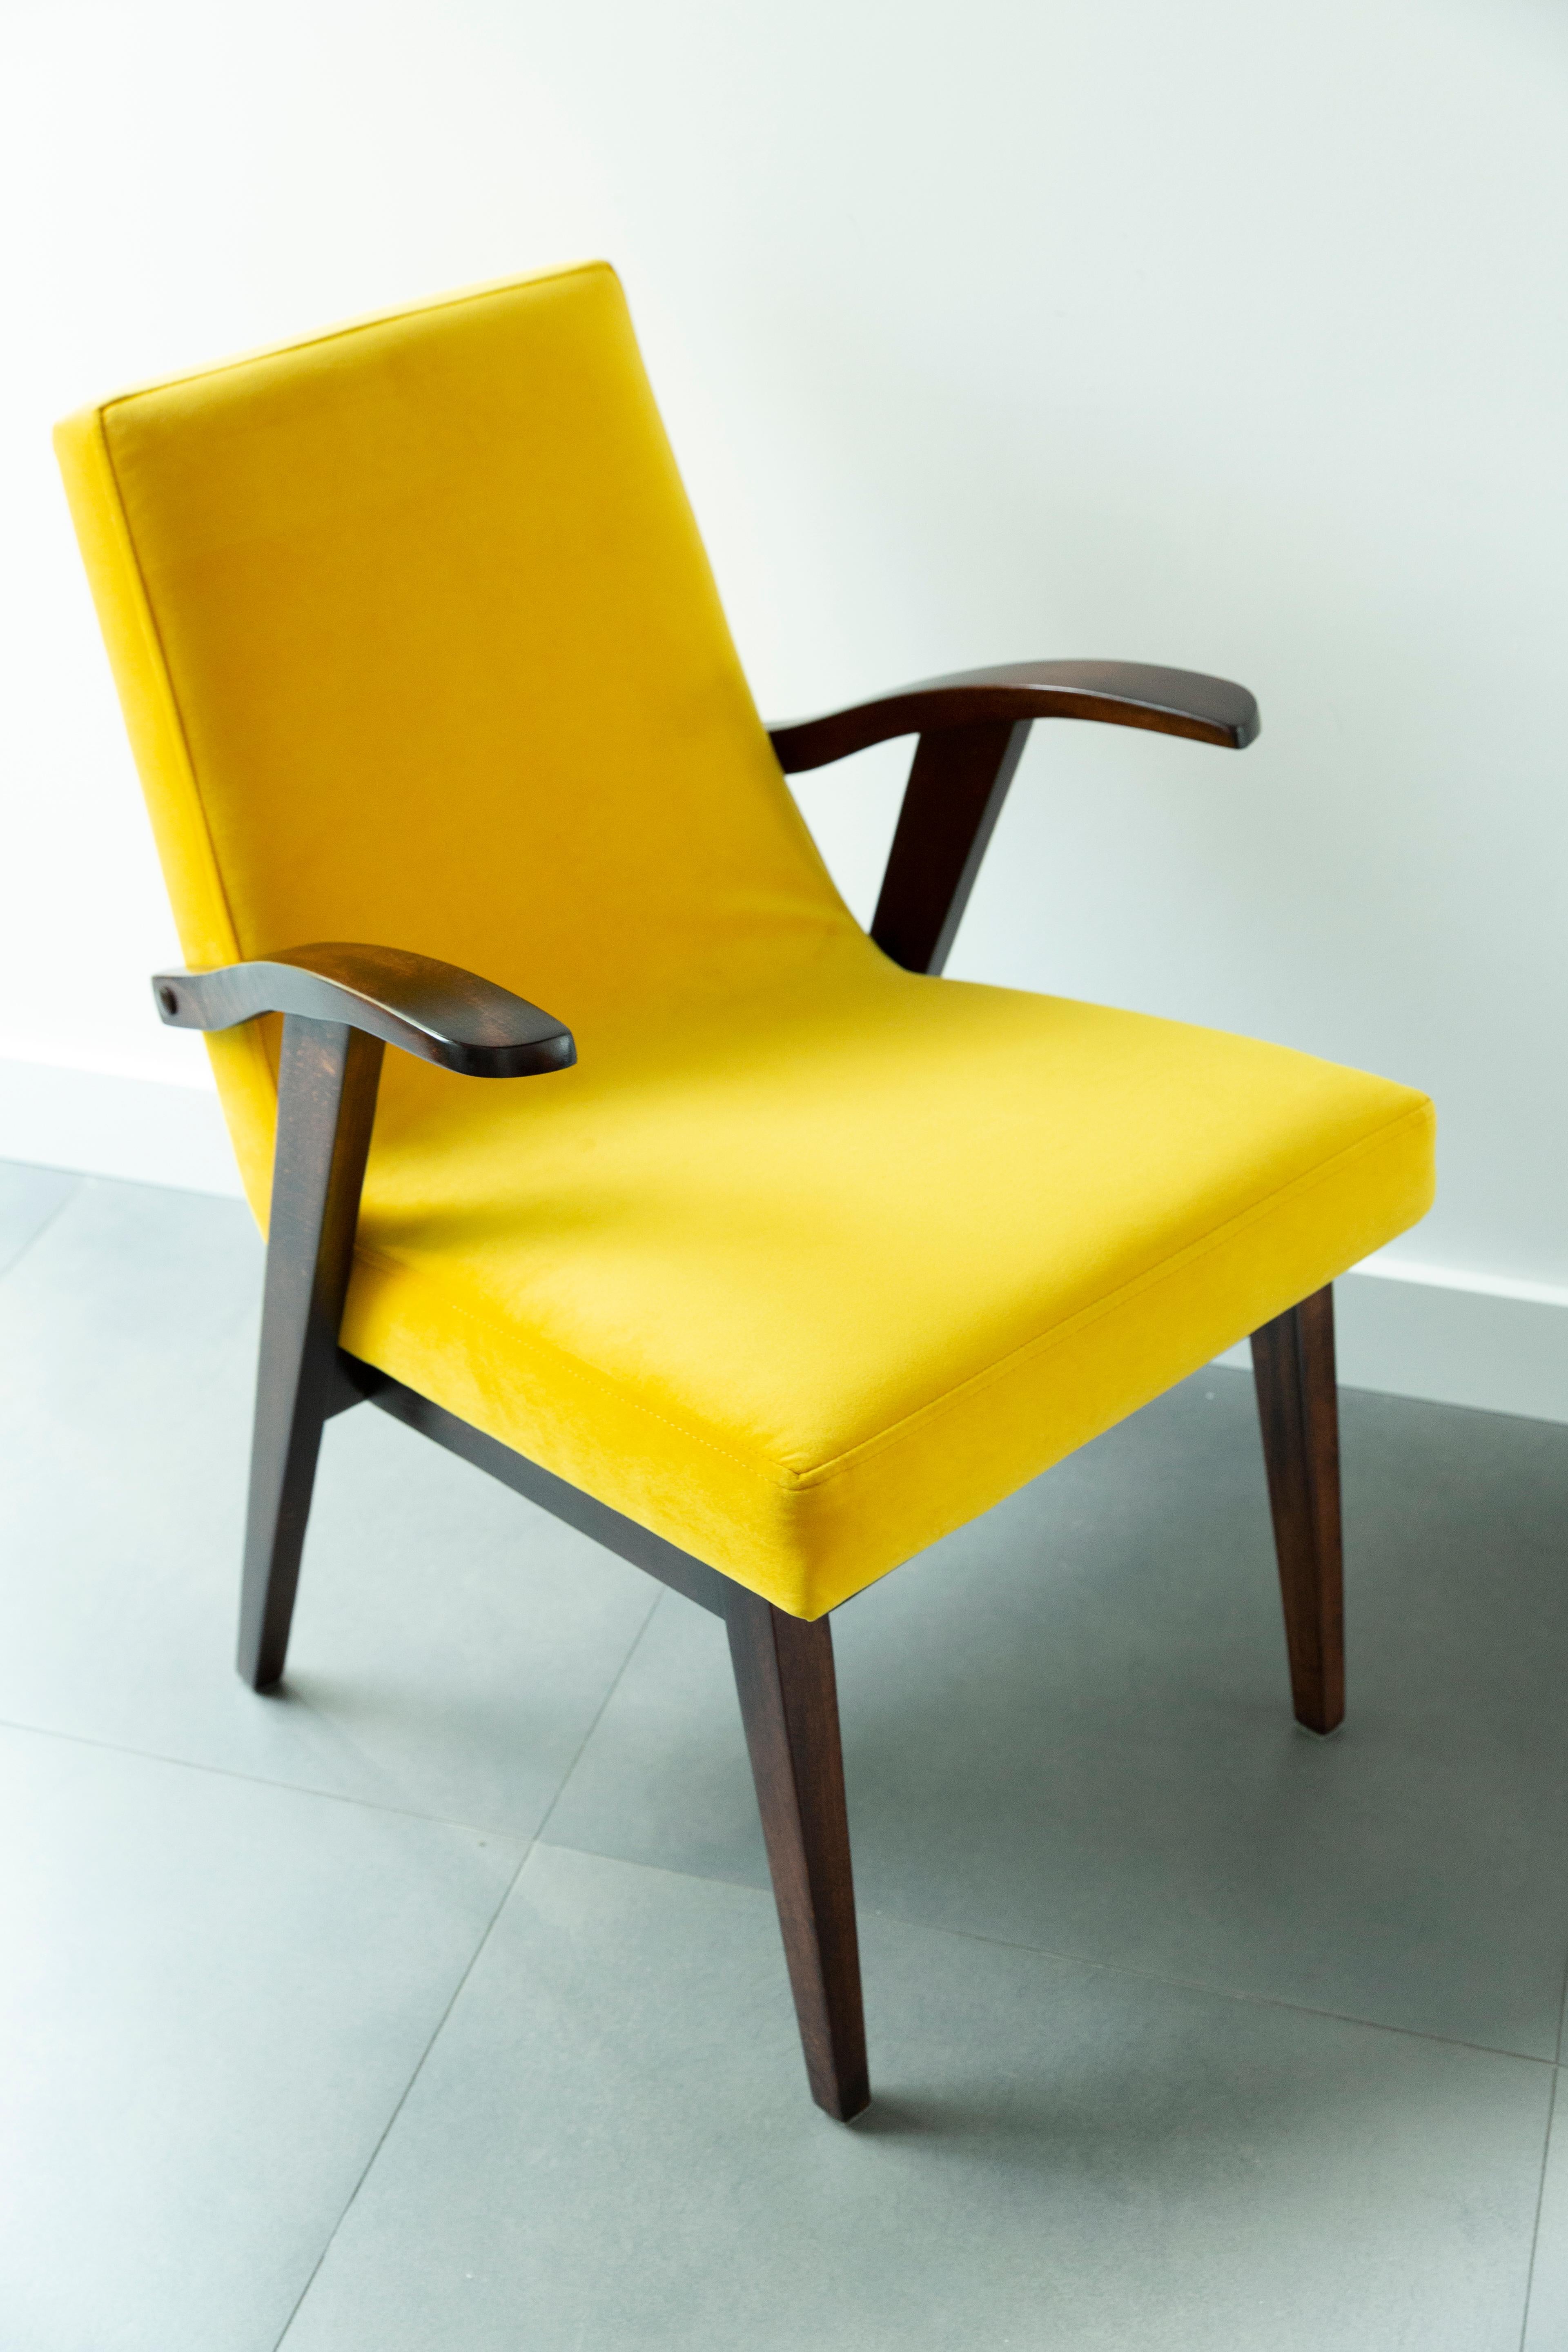 Hand-Crafted 20th Century Vintage Yellow Armchair by Mieczyslaw Puchala, 1960s For Sale